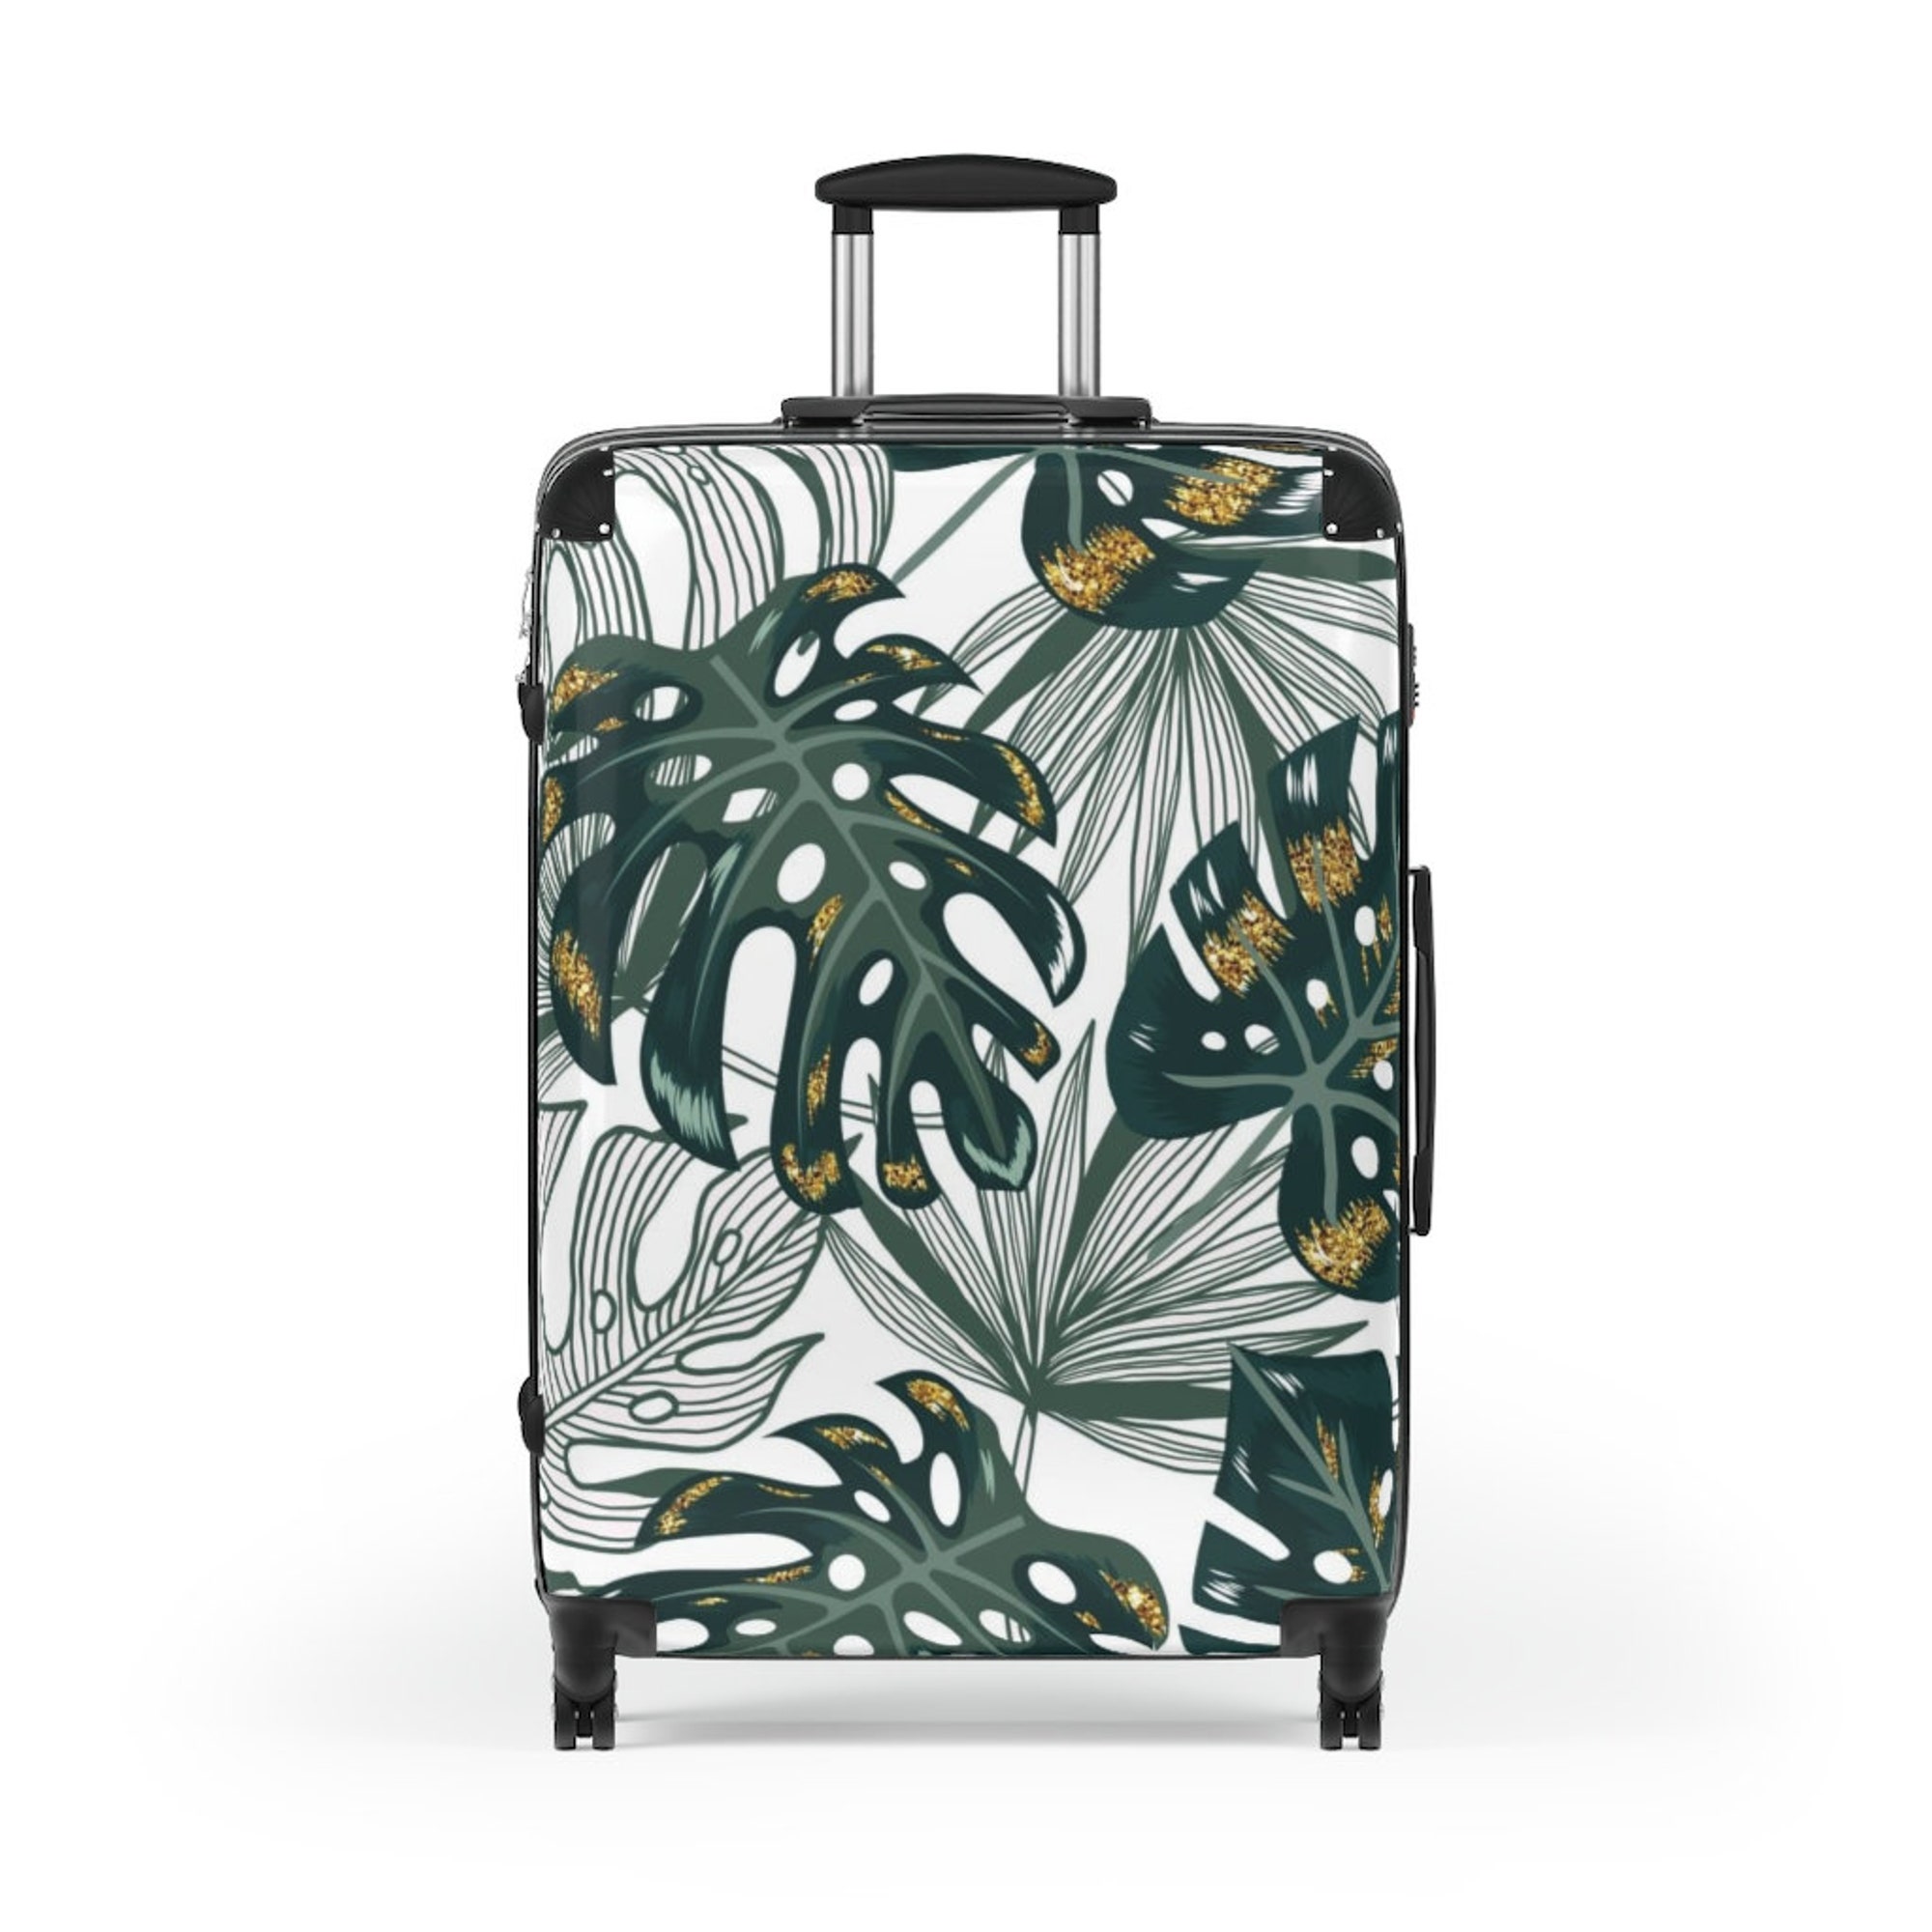 The Tropical Palms Suitcase